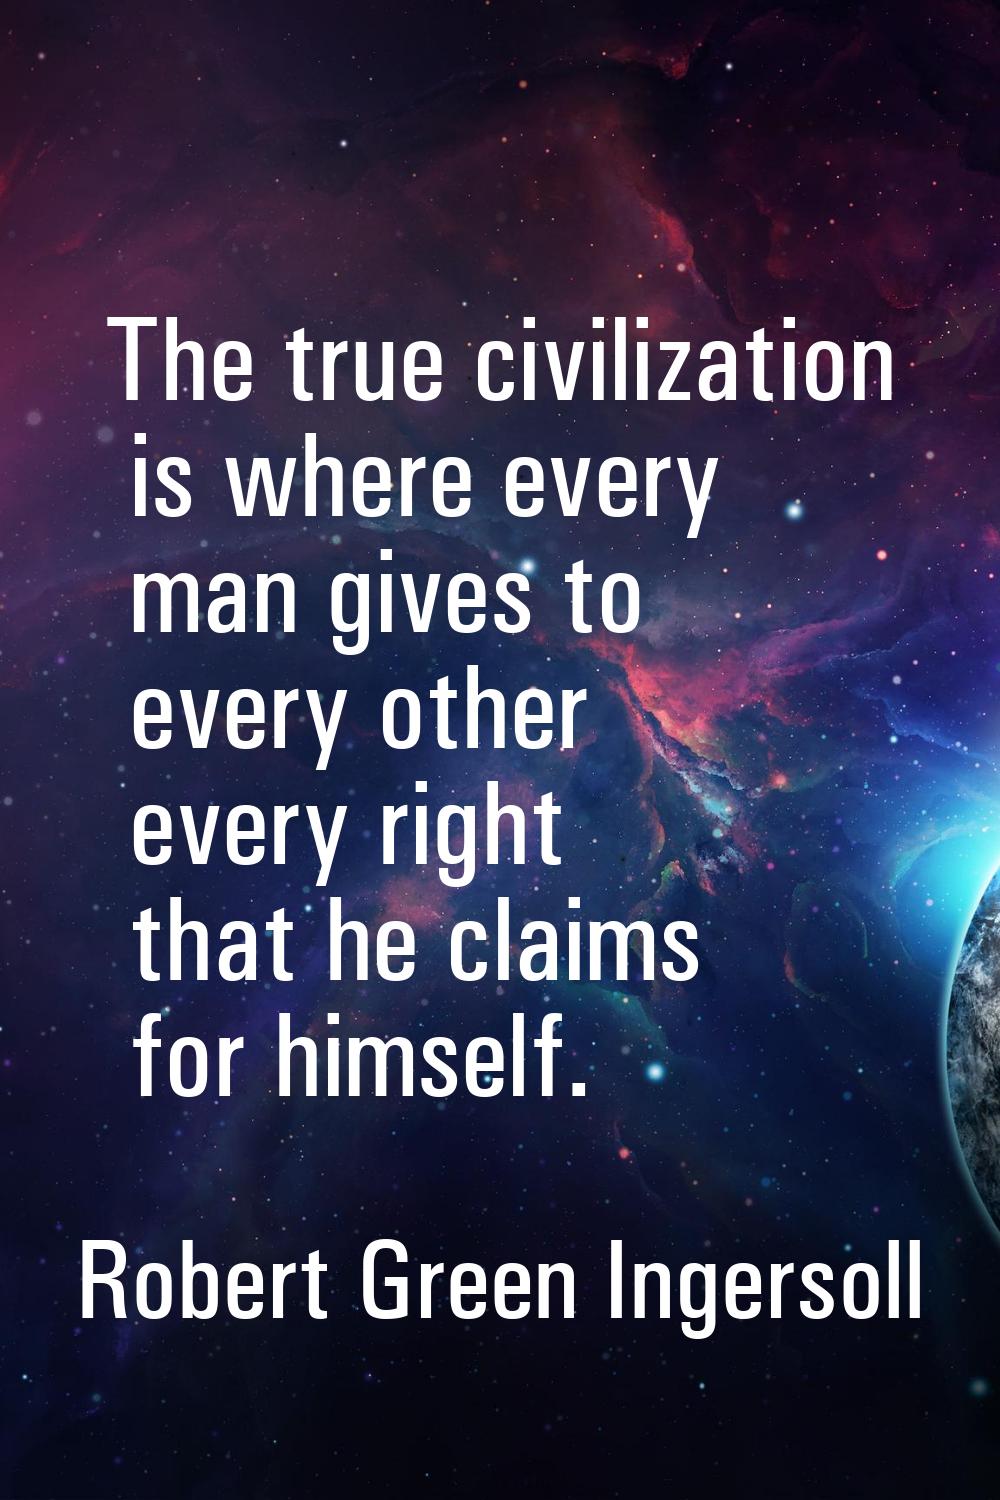 The true civilization is where every man gives to every other every right that he claims for himsel